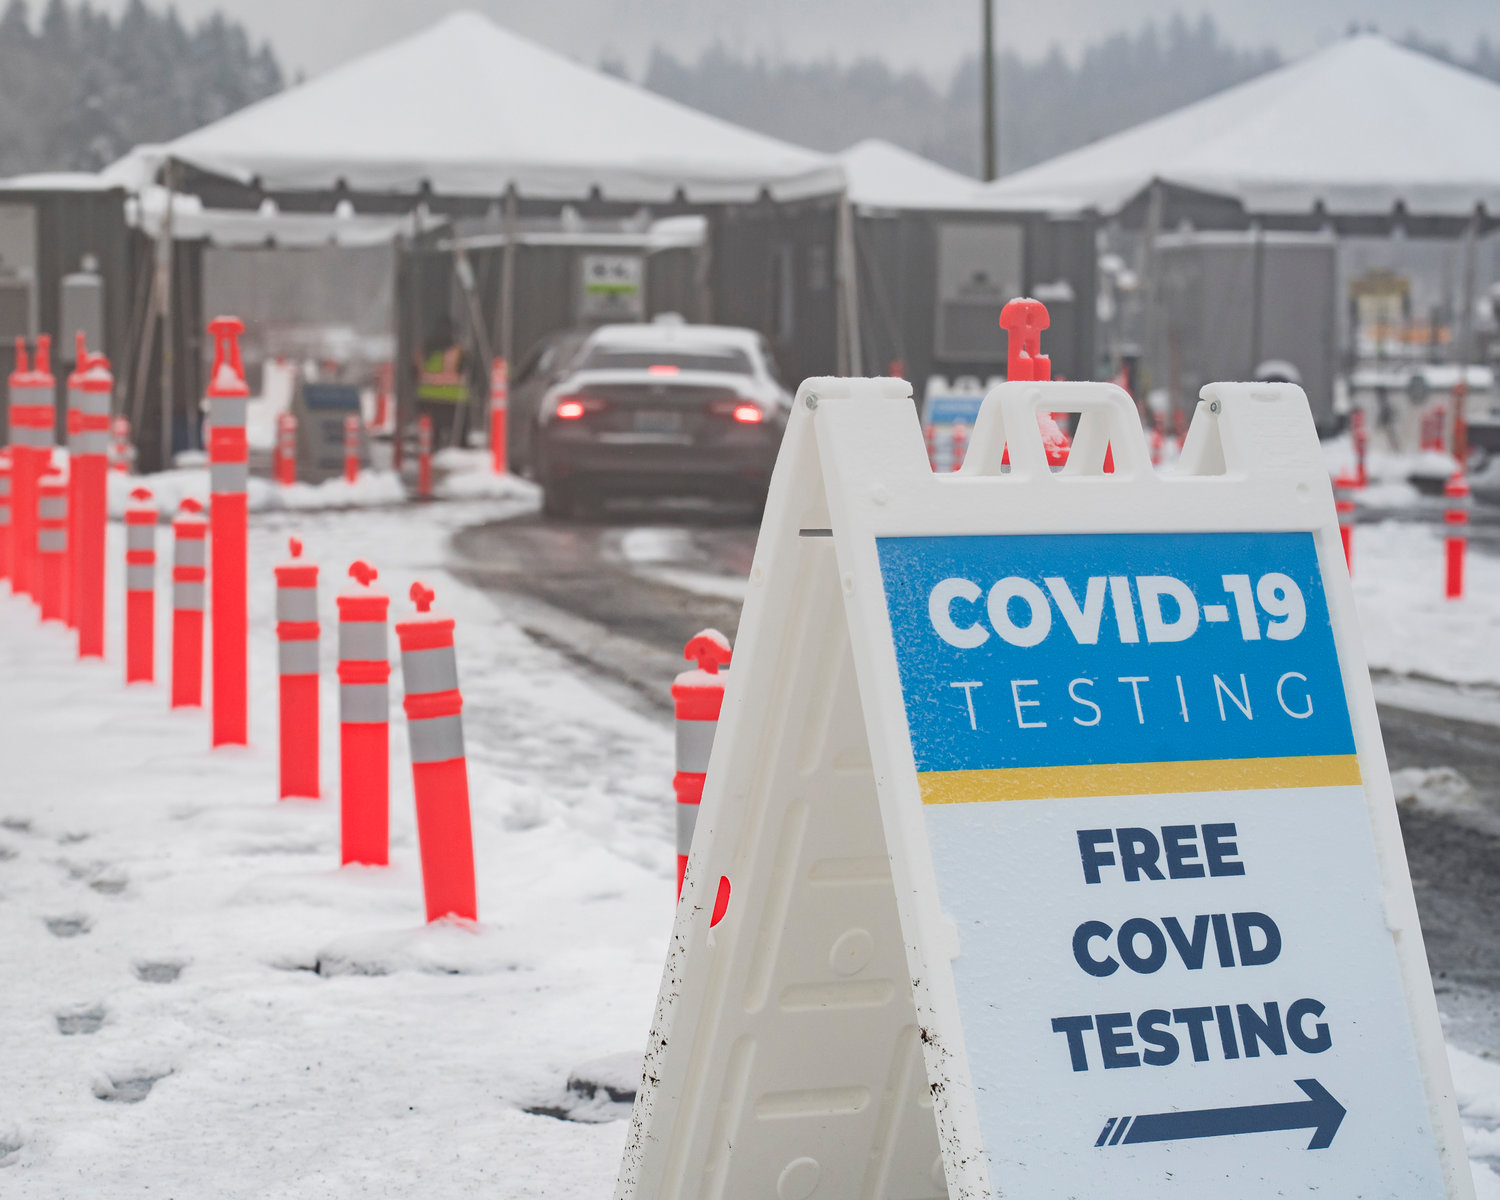 Vehicles are seen at the testing site at the Lewis County Mall in Chehalis on Tuesday.